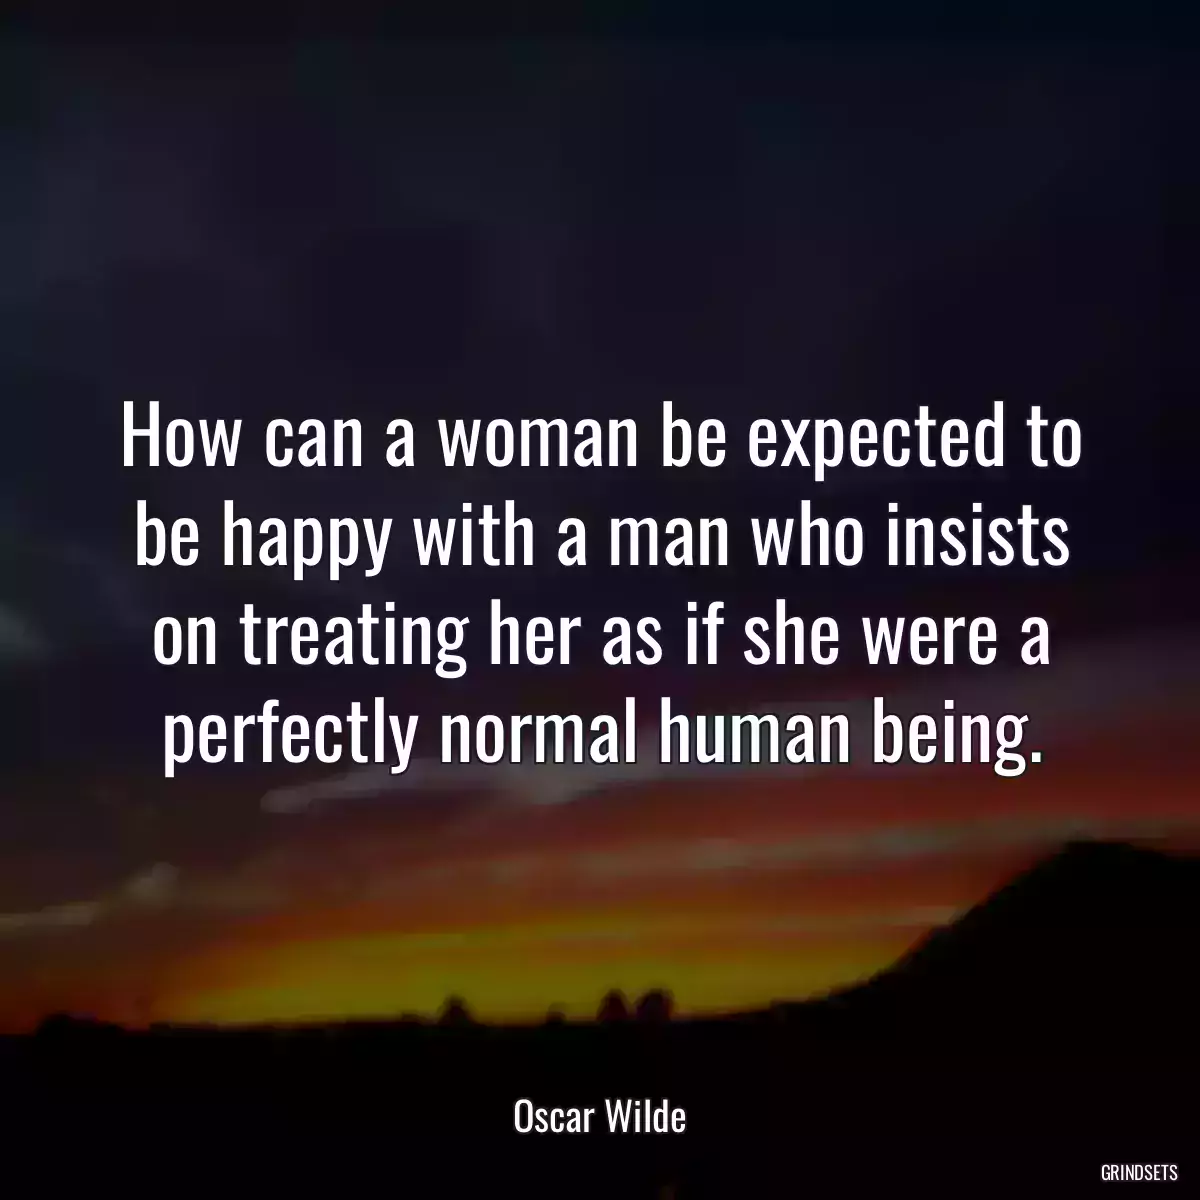 How can a woman be expected to be happy with a man who insists on treating her as if she were a perfectly normal human being.